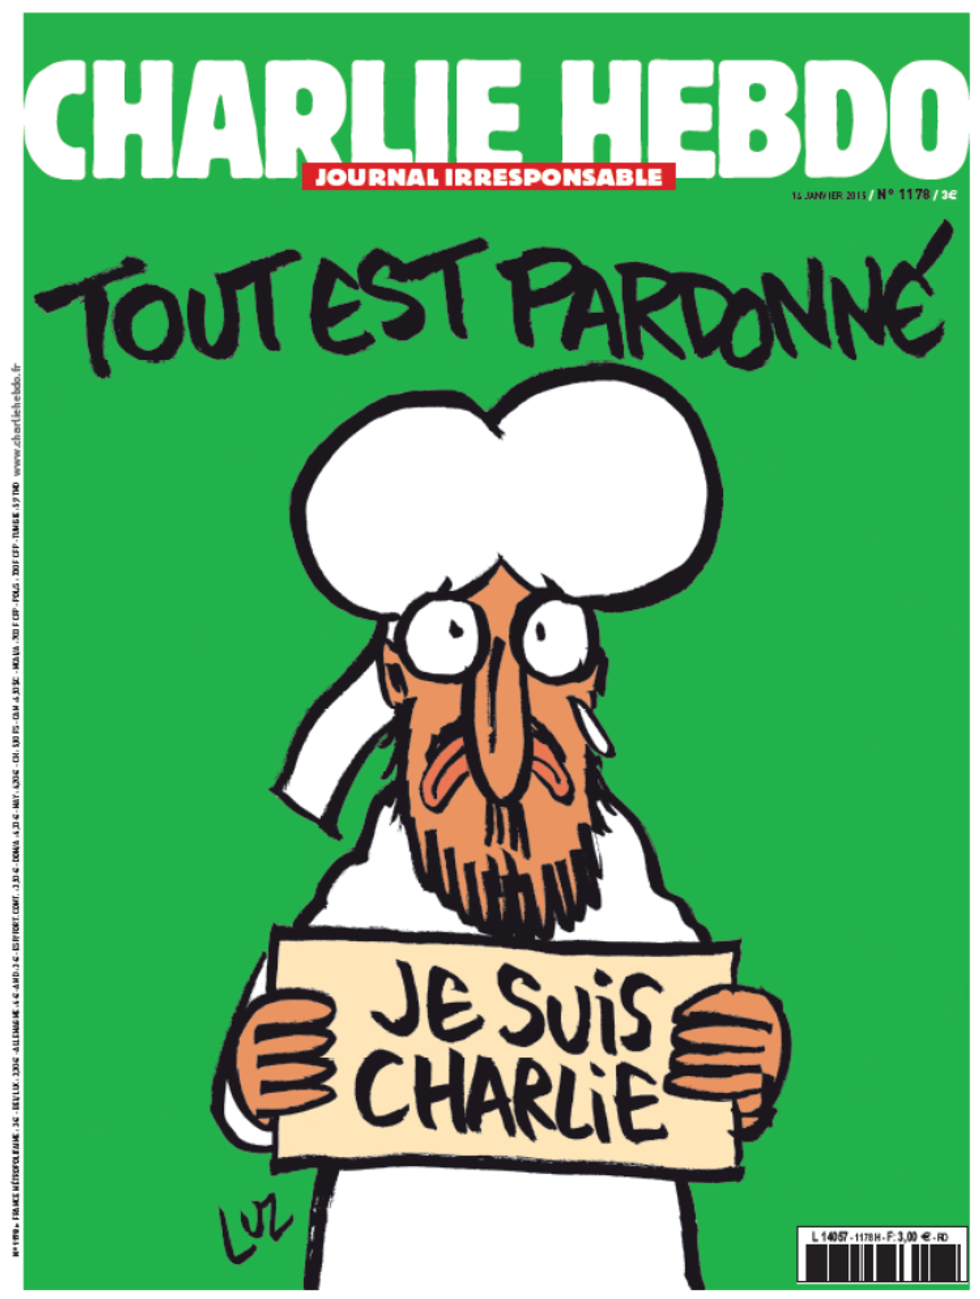 News Organization Tells Reporters Publishing Charlie Hebdo's Bold New Cover Is 'Absolutely Out of Bounds': Report